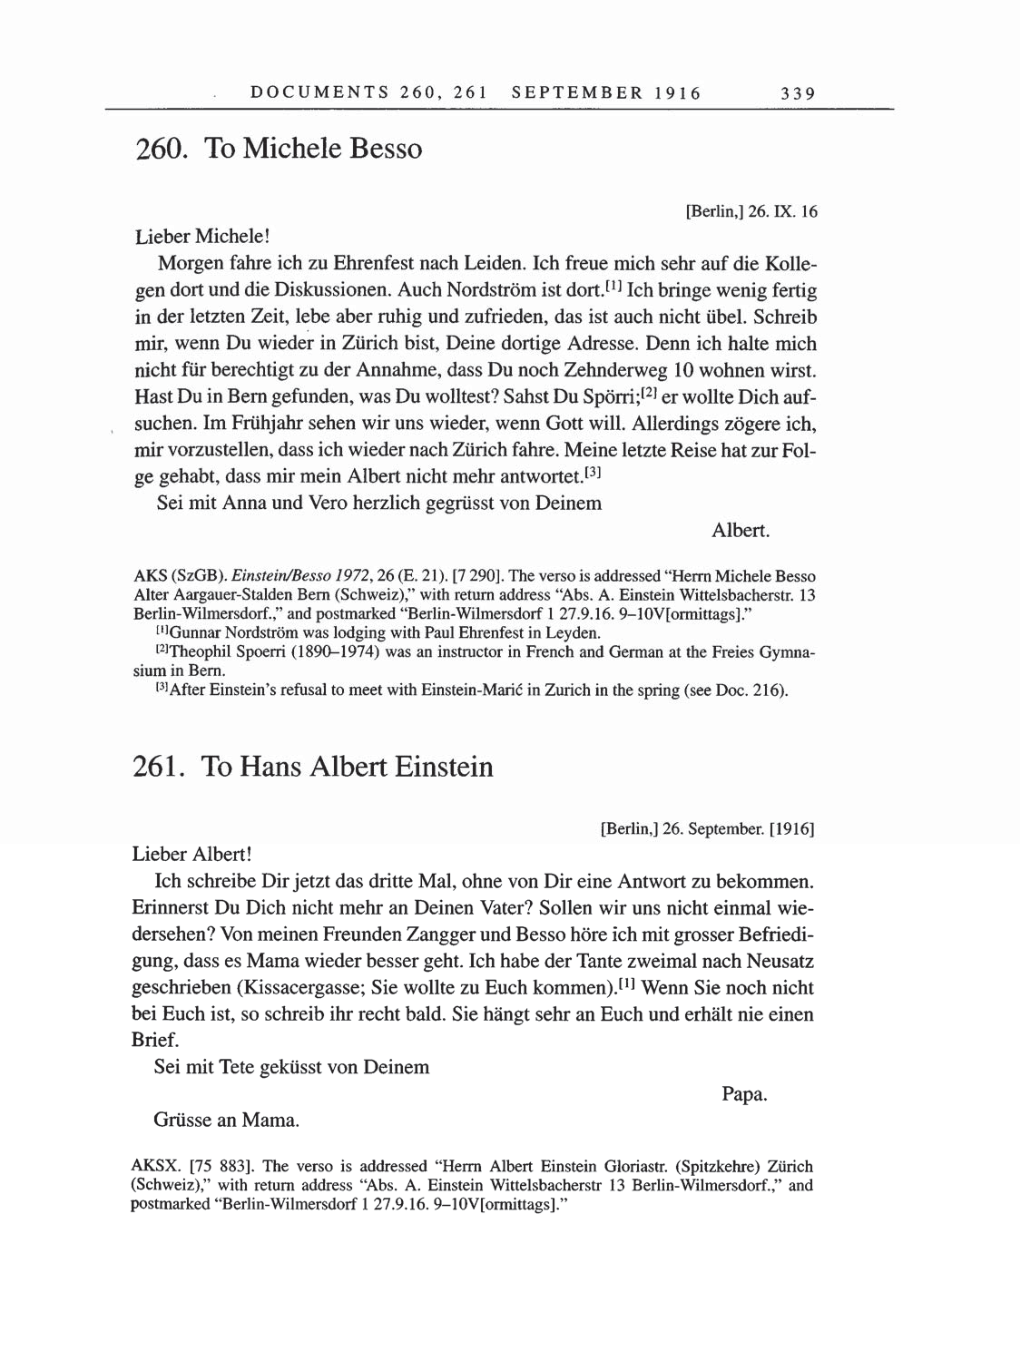 Volume 8, Part A: The Berlin Years: Correspondence 1914-1917 page 339